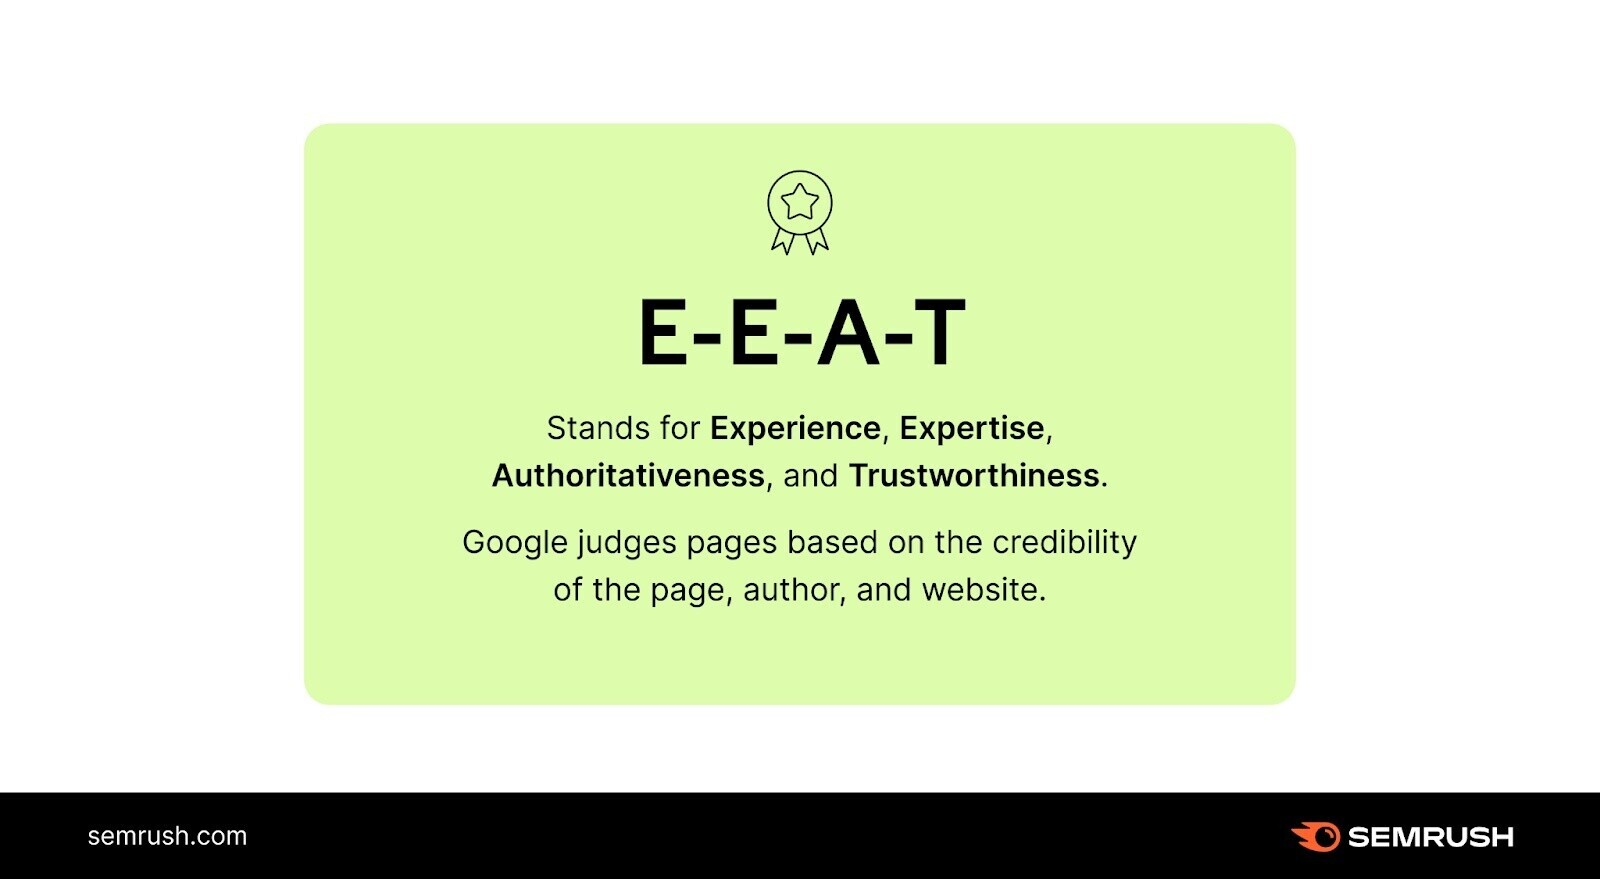 An infographic on what E-E-A-T stands for